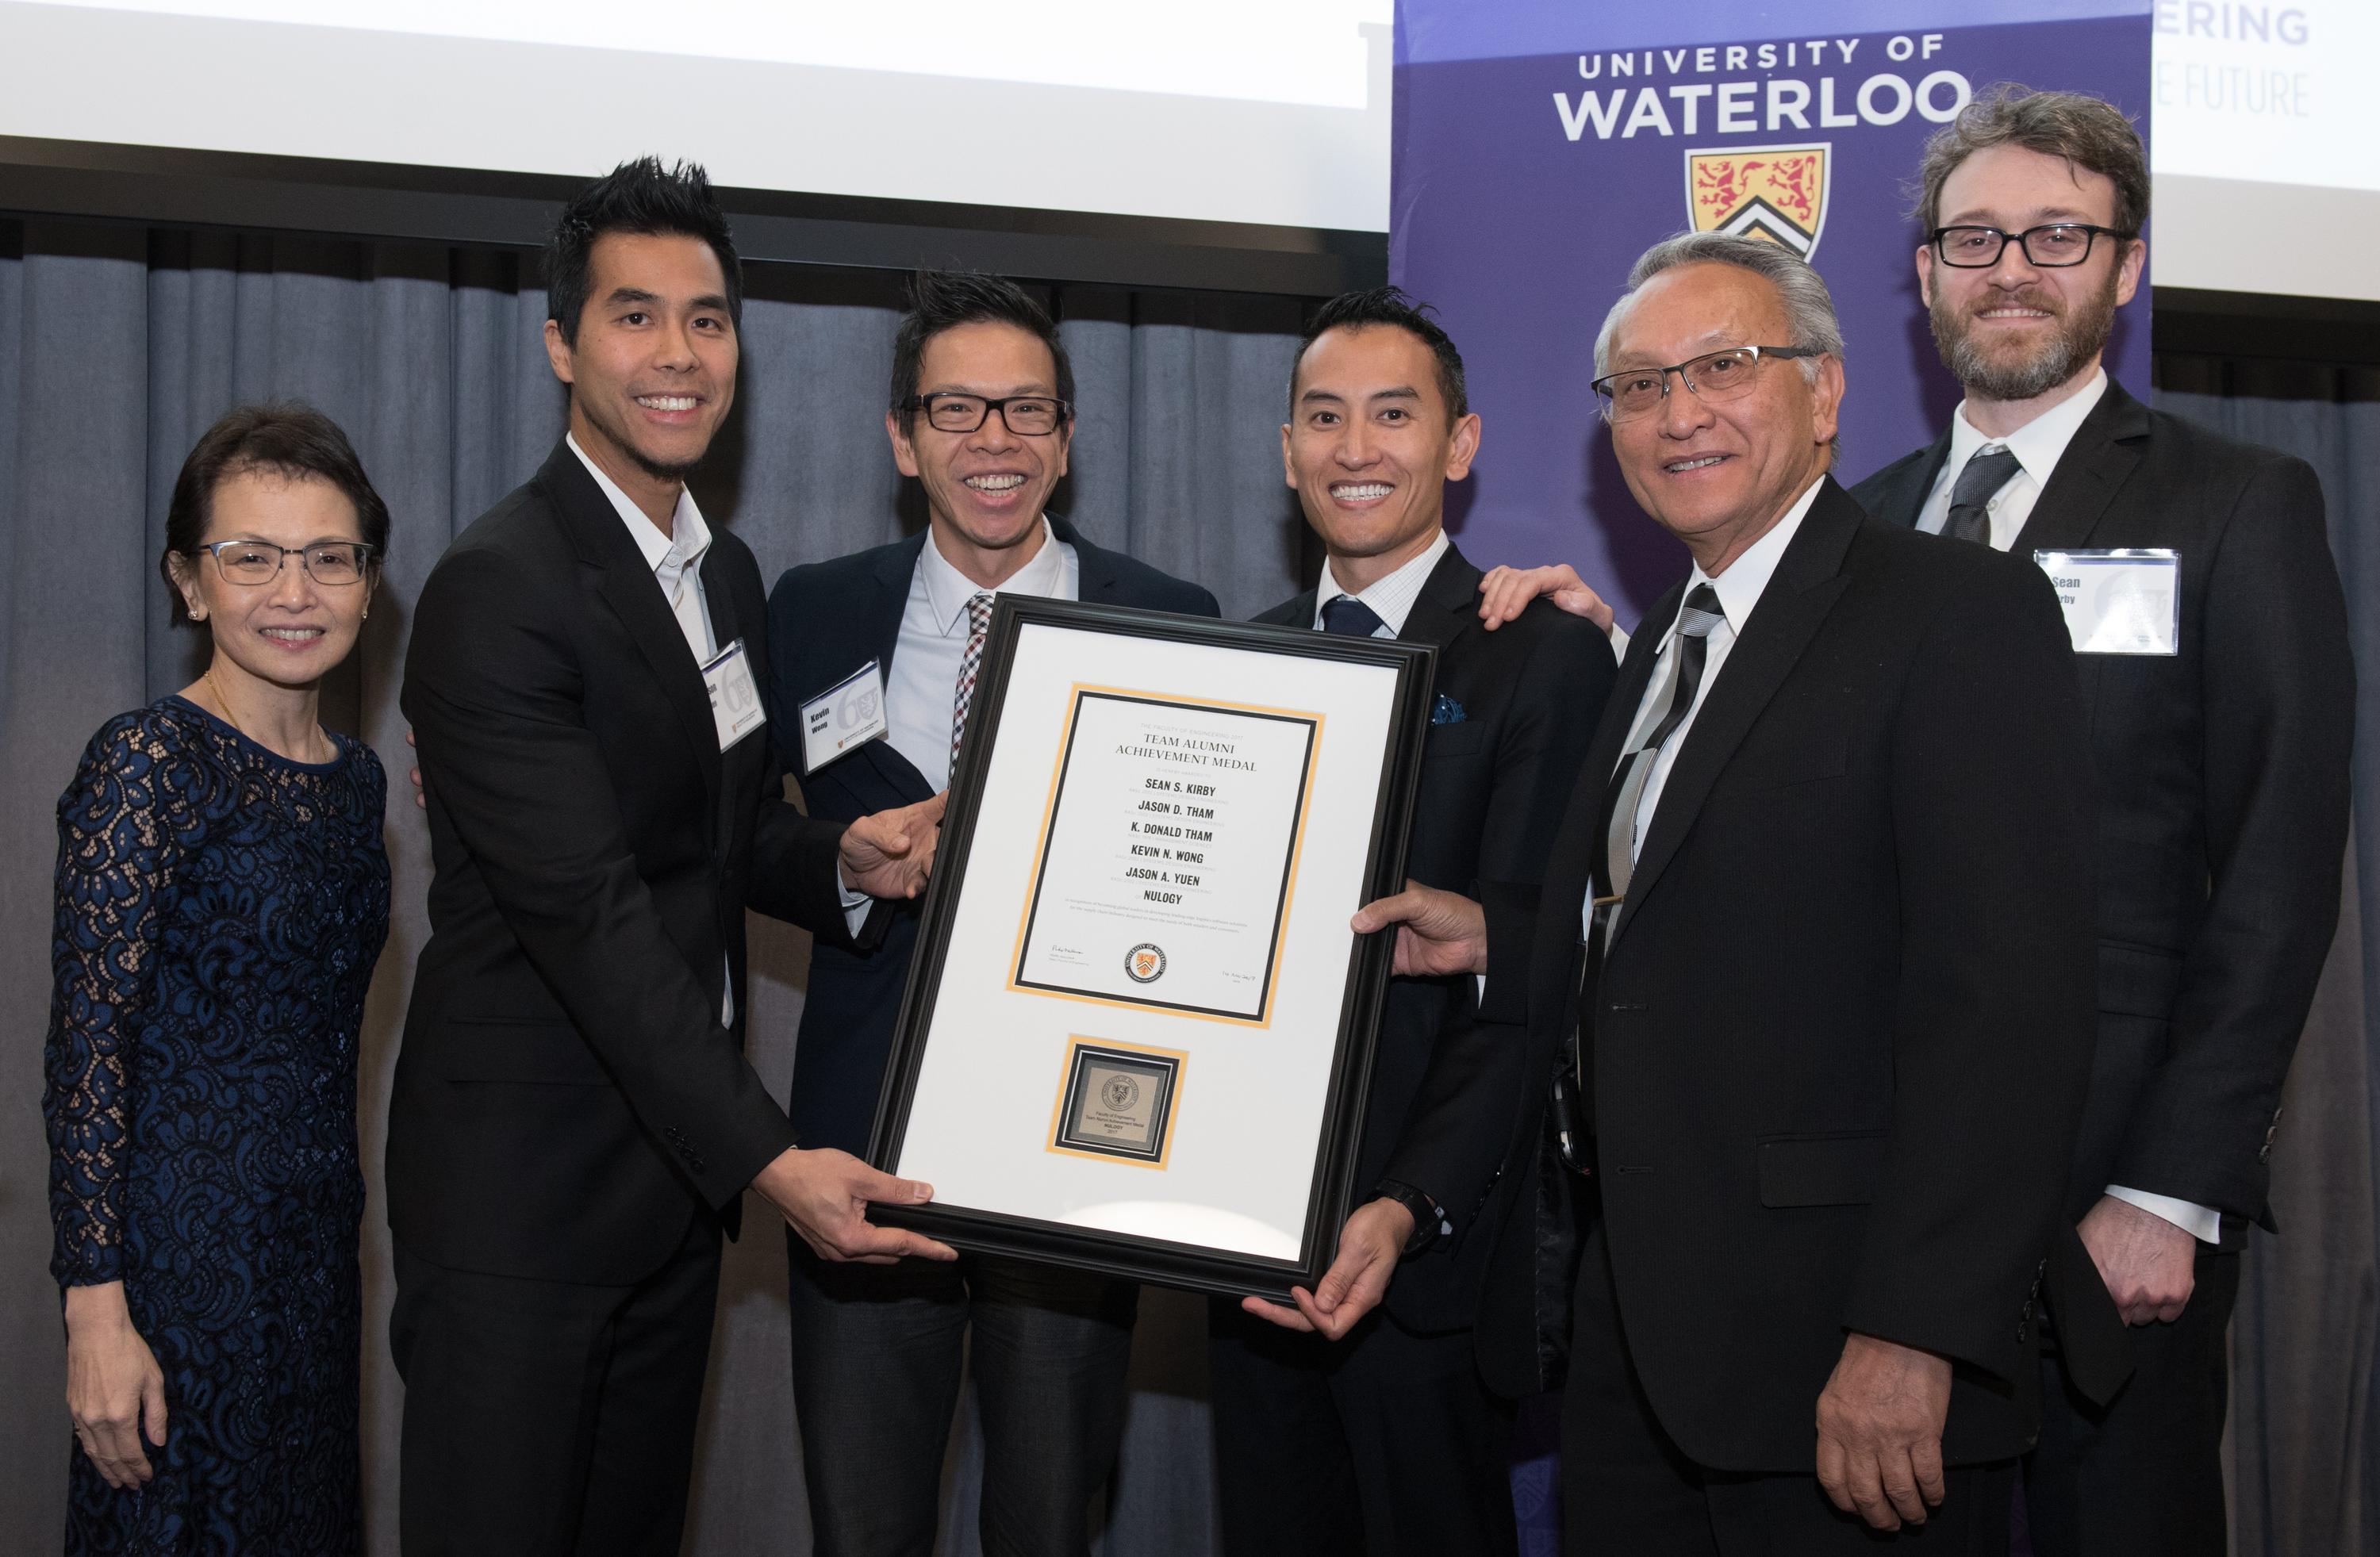 Dean Pearl Sullivan poses with Nulogy founders (from left to right) Jason Yuen, Kevin Wong, Jason Tham, Donald Tham and Sean Kirby.